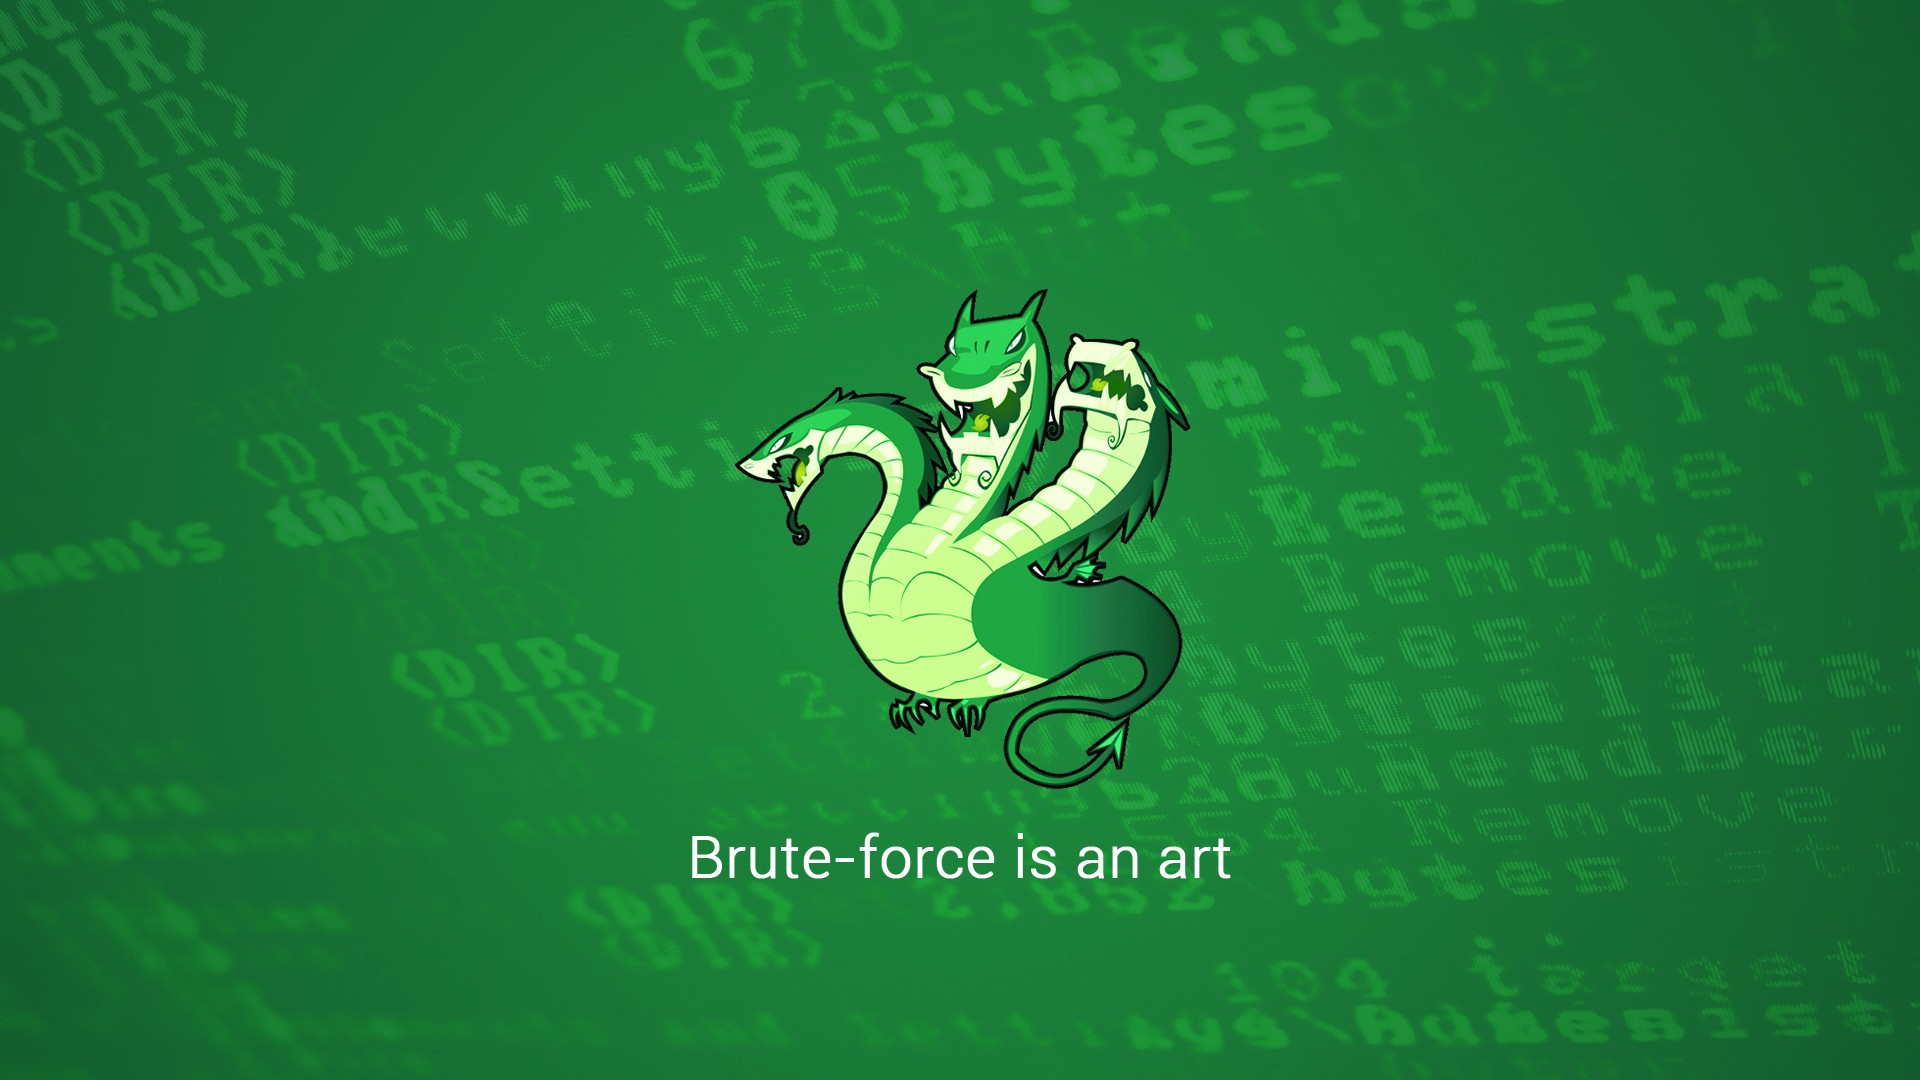 General 1920x1080 hacking hydra Linux dragon green background code technology tools